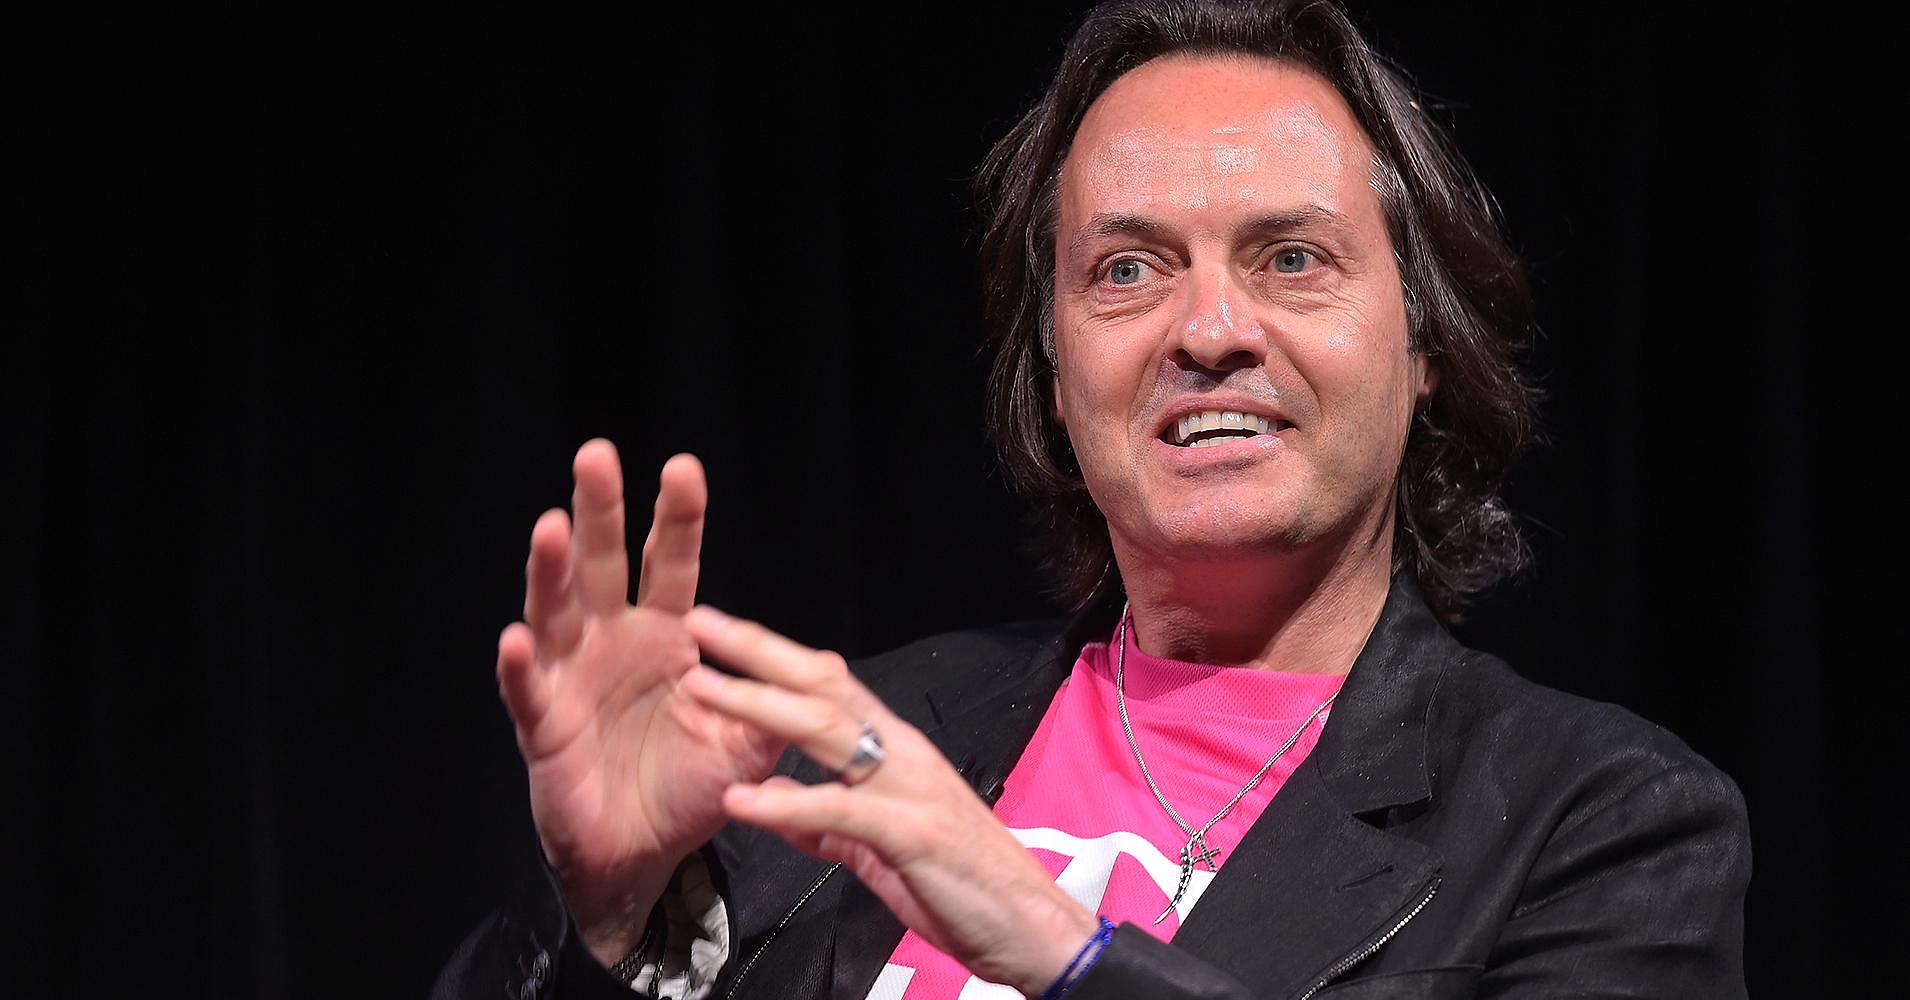 Sprint, T-Mobile set to announce a $26 billion merger, with John Legere at the helm1910 x 1000